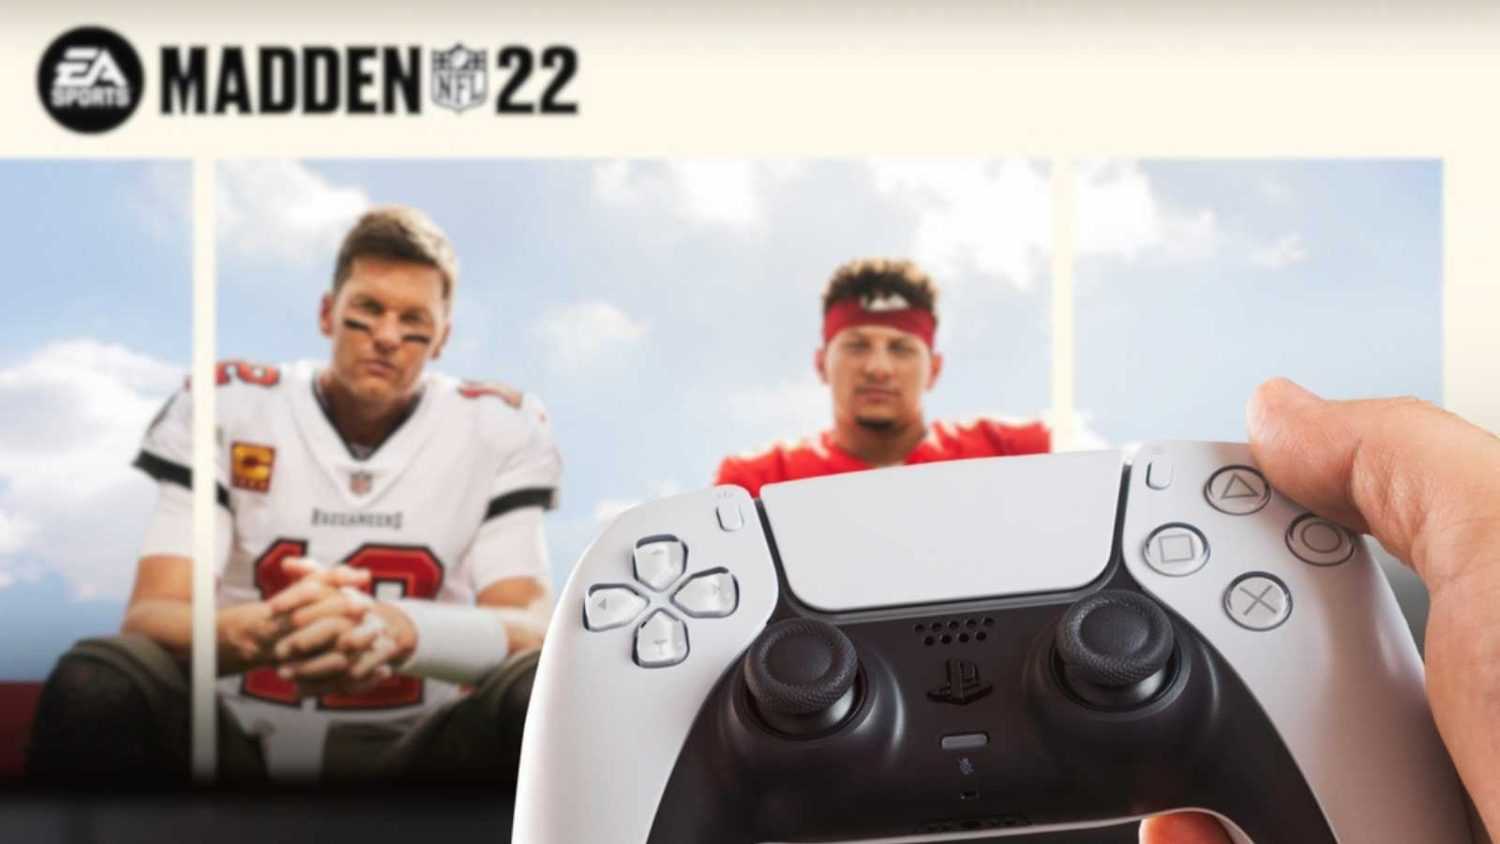 Male hand holding a Playstation 5 Dual Sense Controller with Madden NFL 22 game blurred in the background. Rio de Janeiro, RJ, Brazil. November 2021.